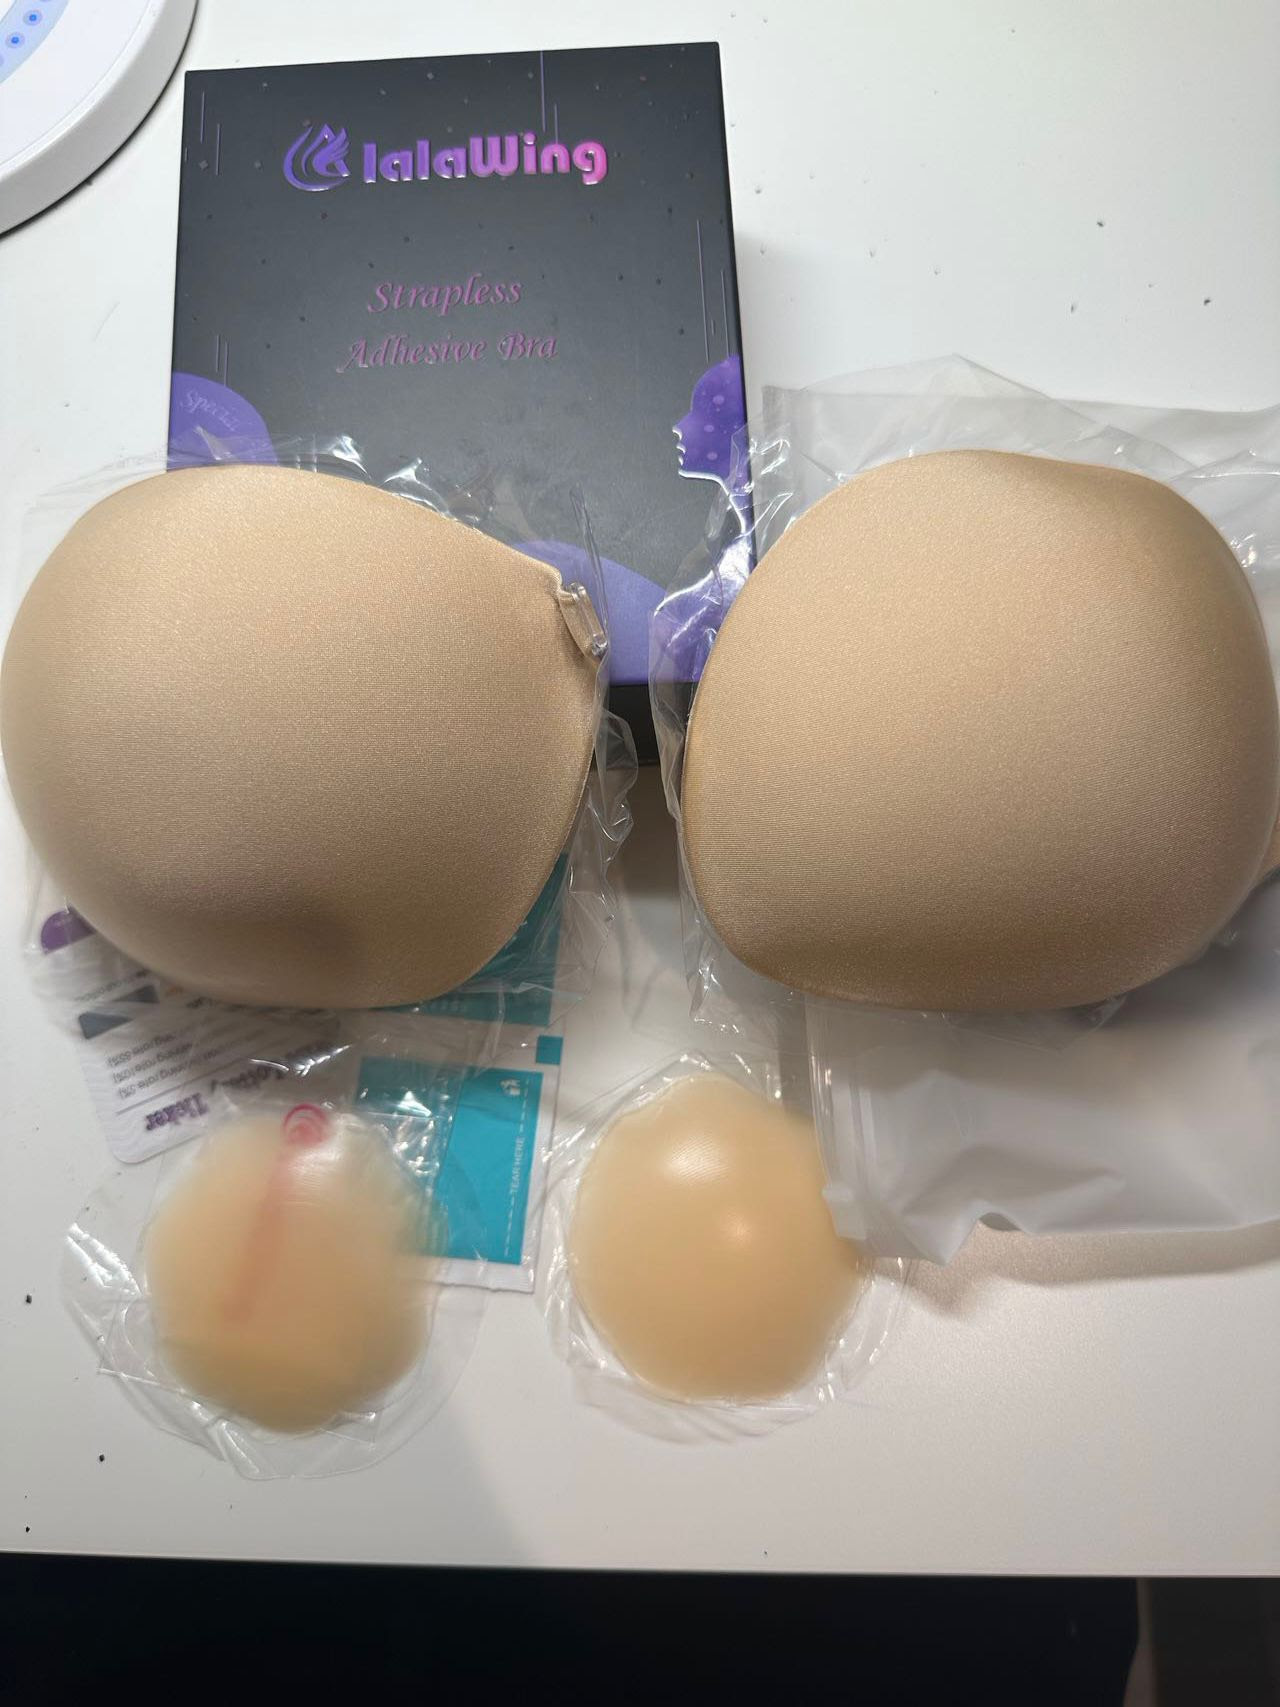 lalaWing Adhesive Sticky Strapless Bra. 7300 pairs. EXW Los Angeles $1.99 pair.